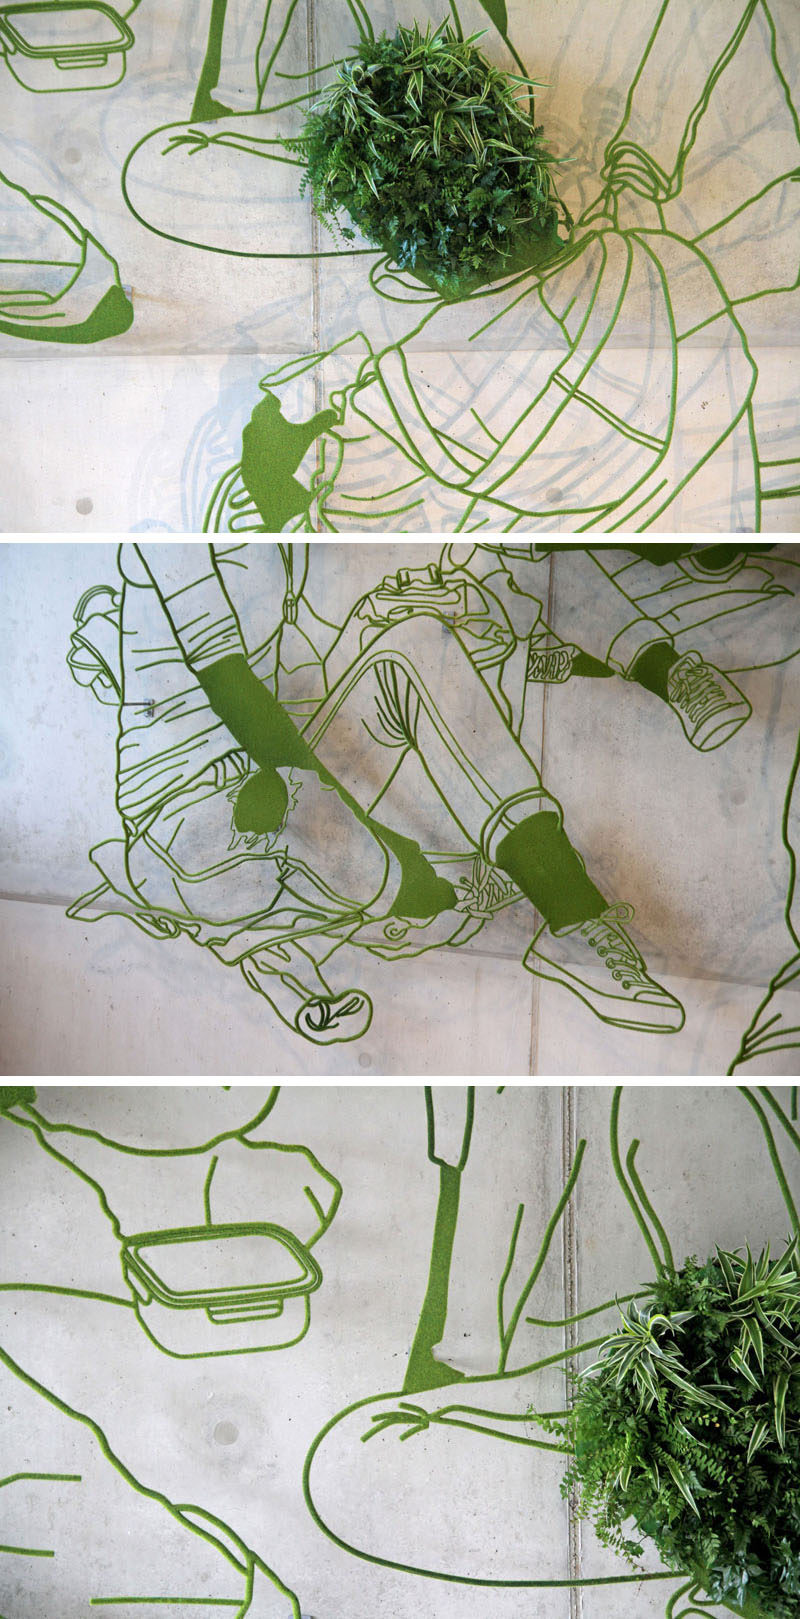 Sculptor Frank Plant has created a large steel and plant based drawing for the wall of a university in the Netherlands.